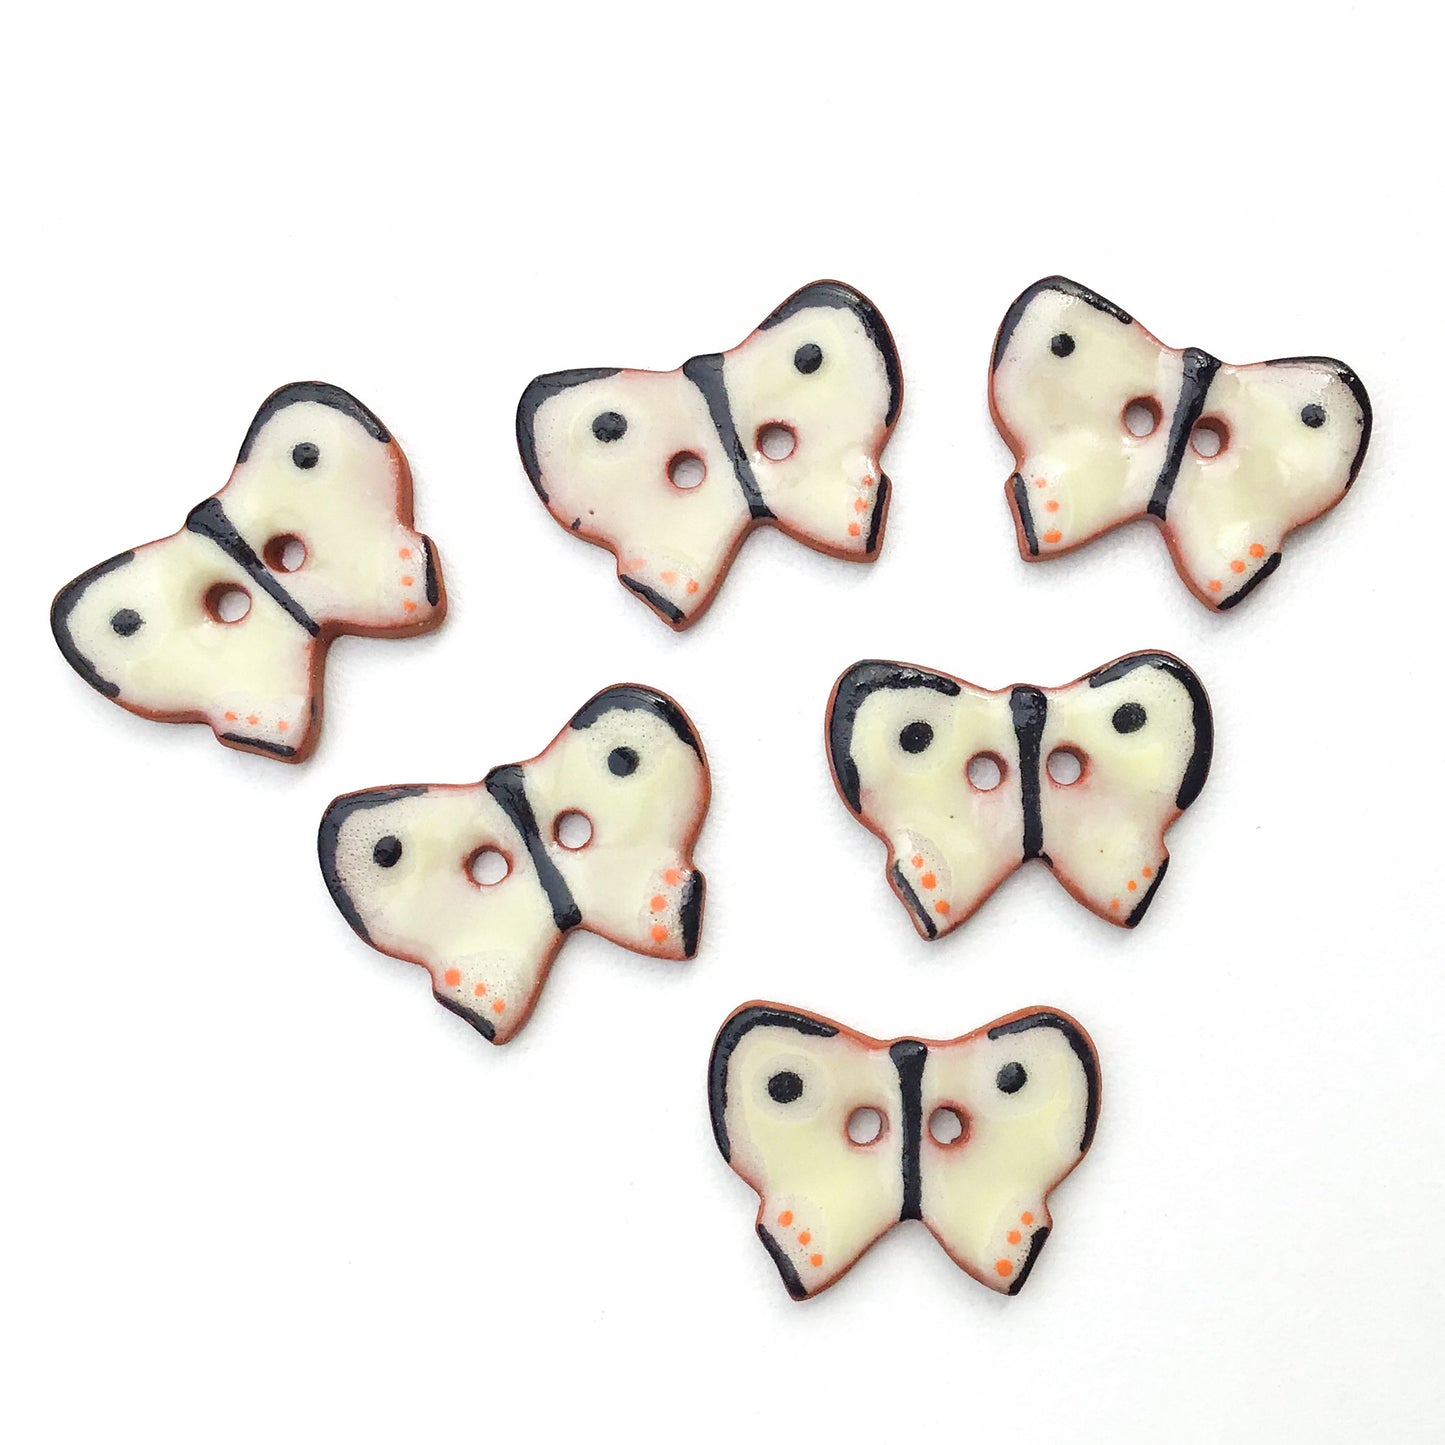 Ceramic Butterfly Buttons - Light Yellow and Black Butterfly Buttons - 5/8" x 7/8" - 6 Pack